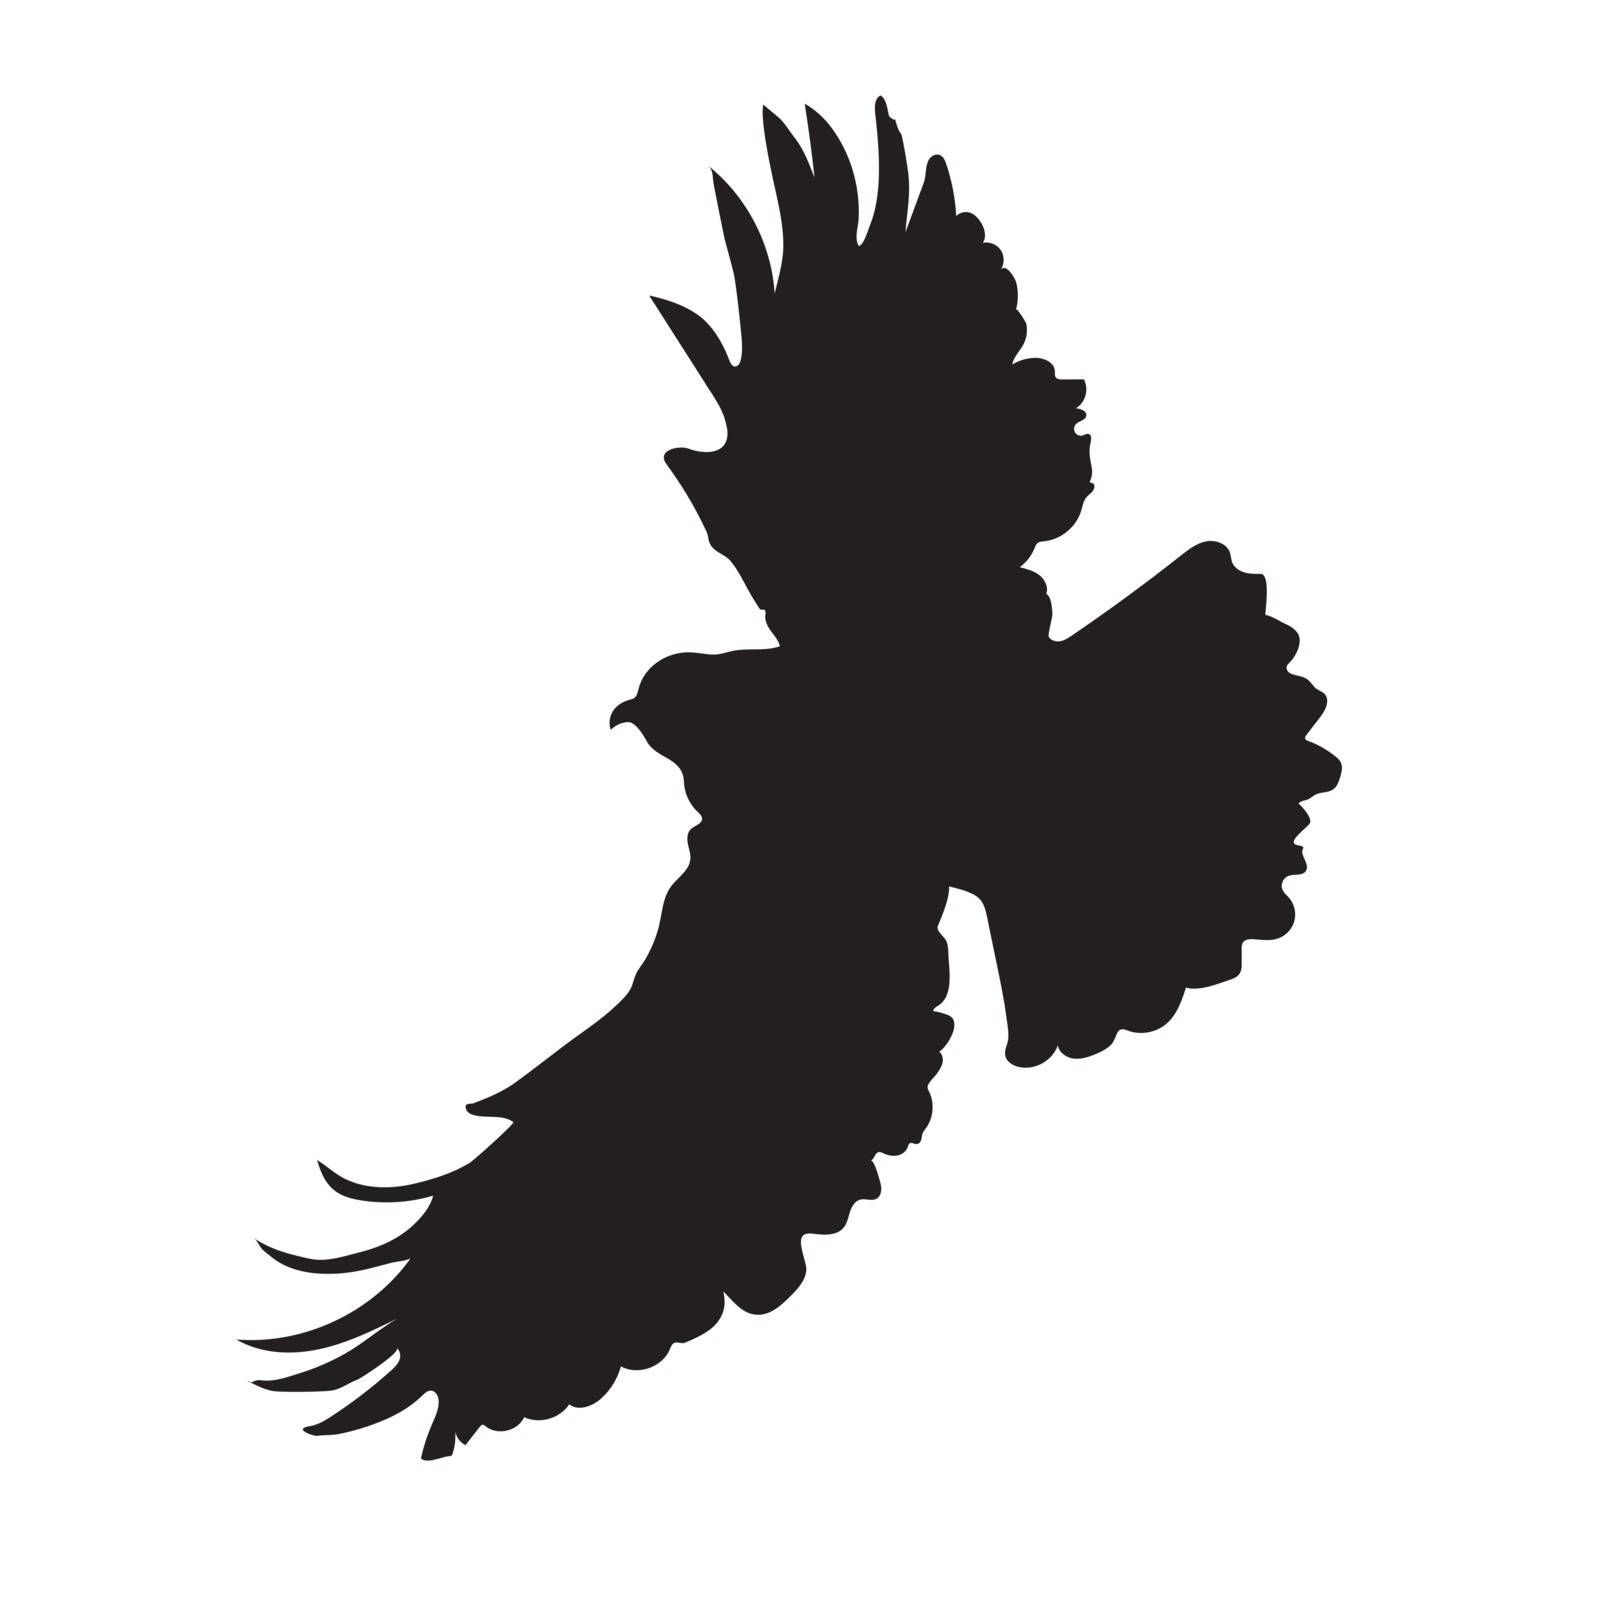 A silhouette of an eagle or hawk in mid flight